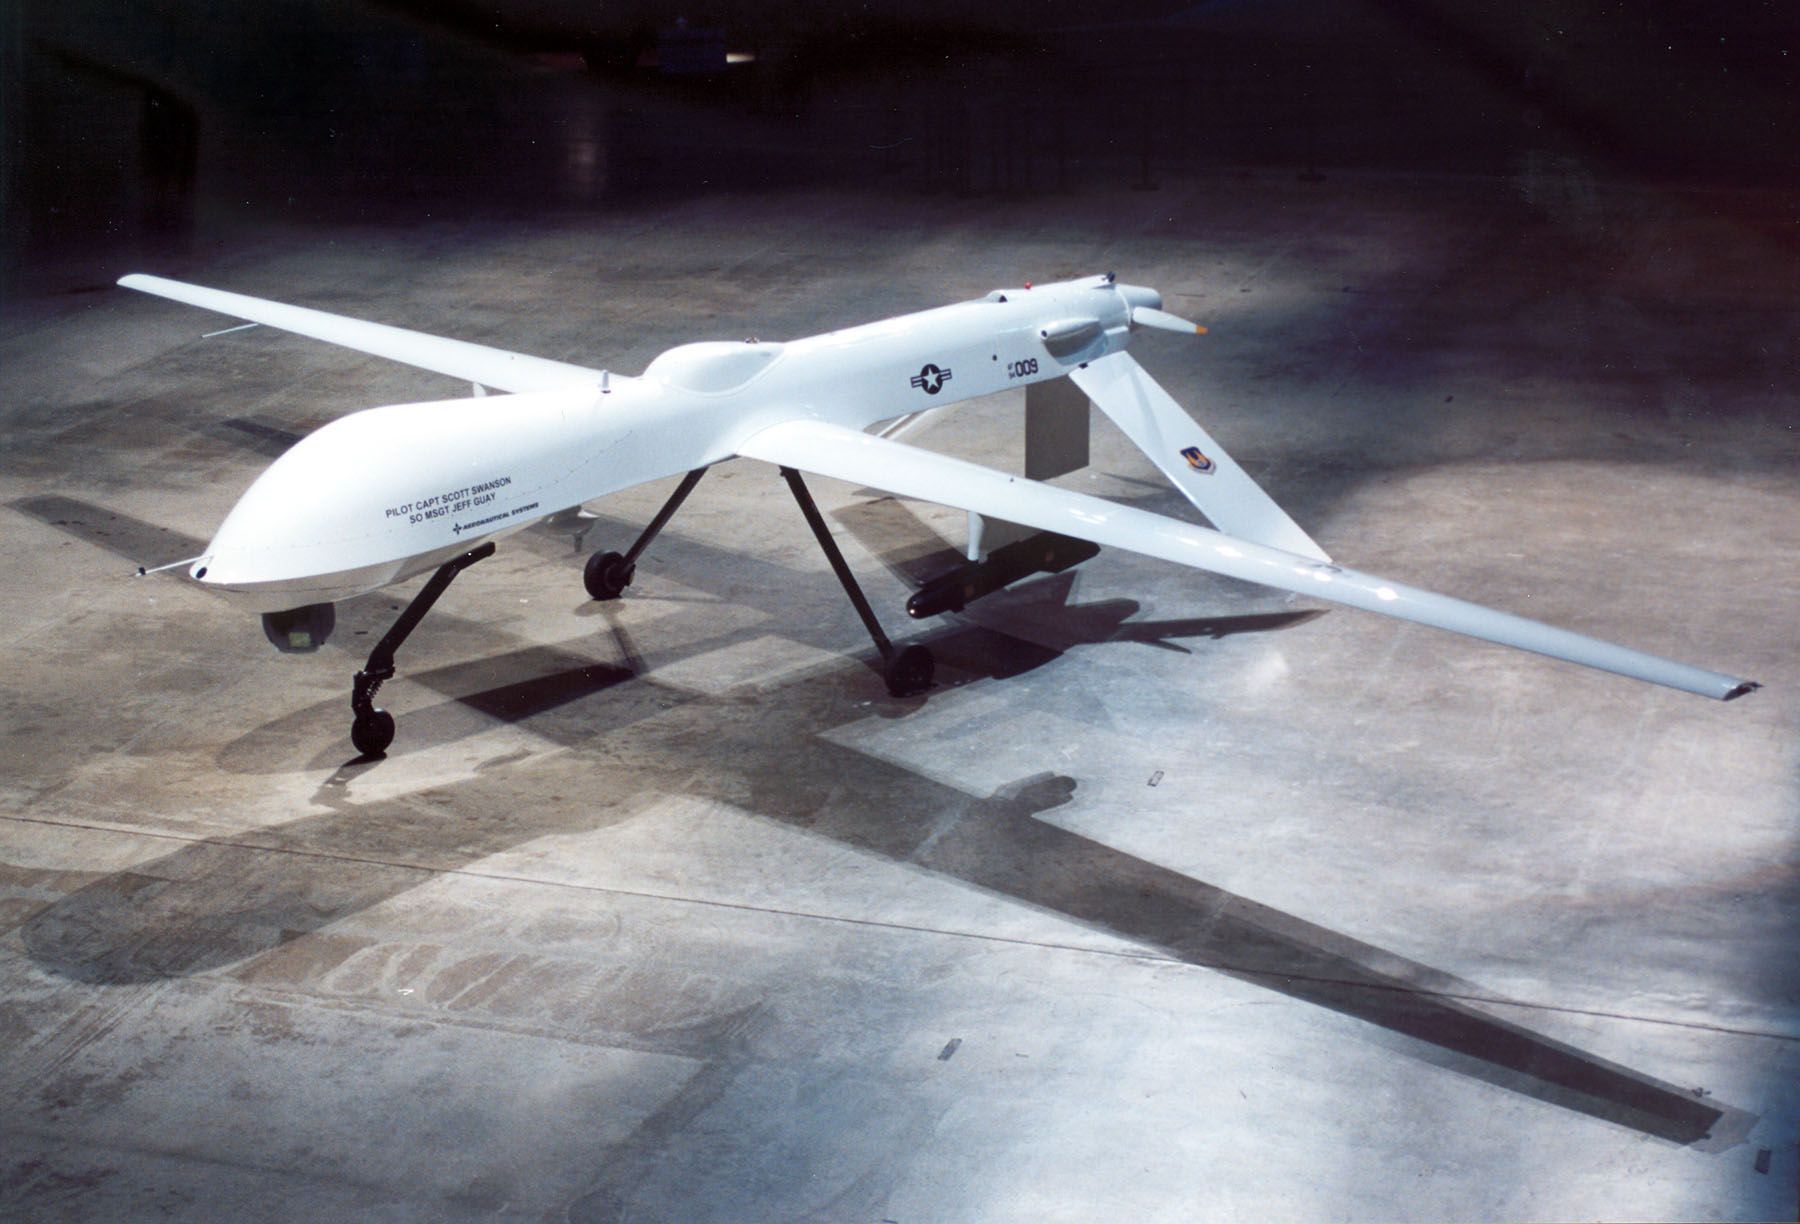 Interview: The Drone That Started It All